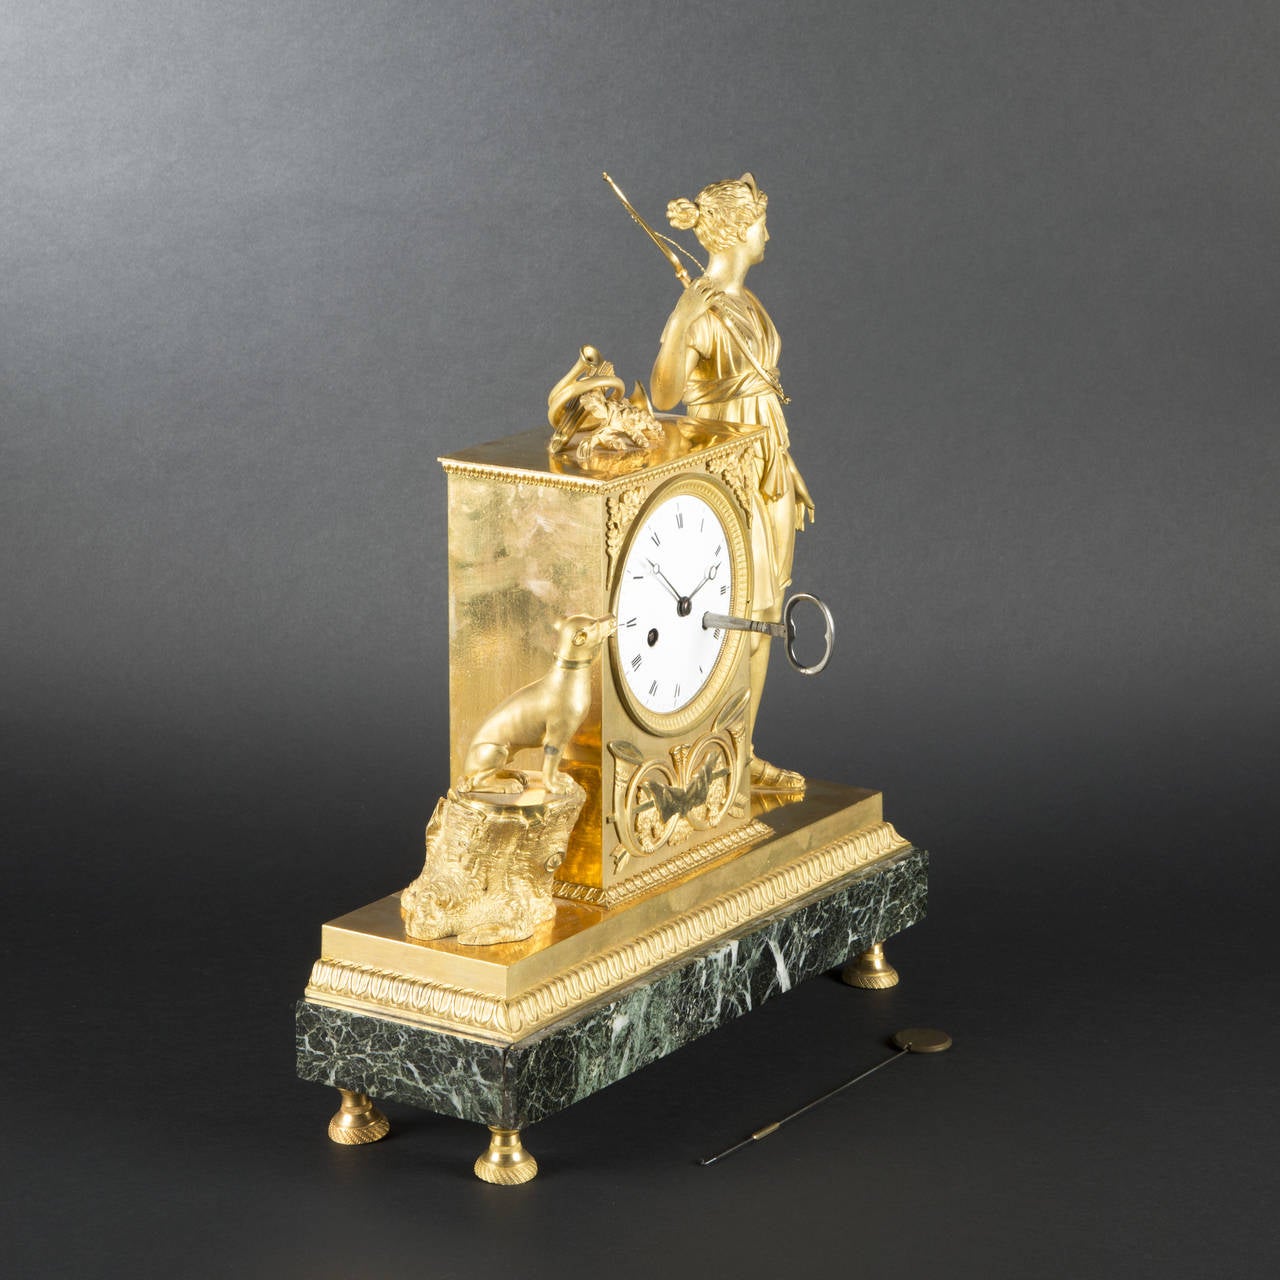 Attributed to Ravrio

Chiseled bronze and gilt mantle clock, in a mercury gilding from the period with burnished agate mat finish, depicting Diana with her attributes, her dog on a tree trunk. Dial-plate on a terminal decorated with hunting horns